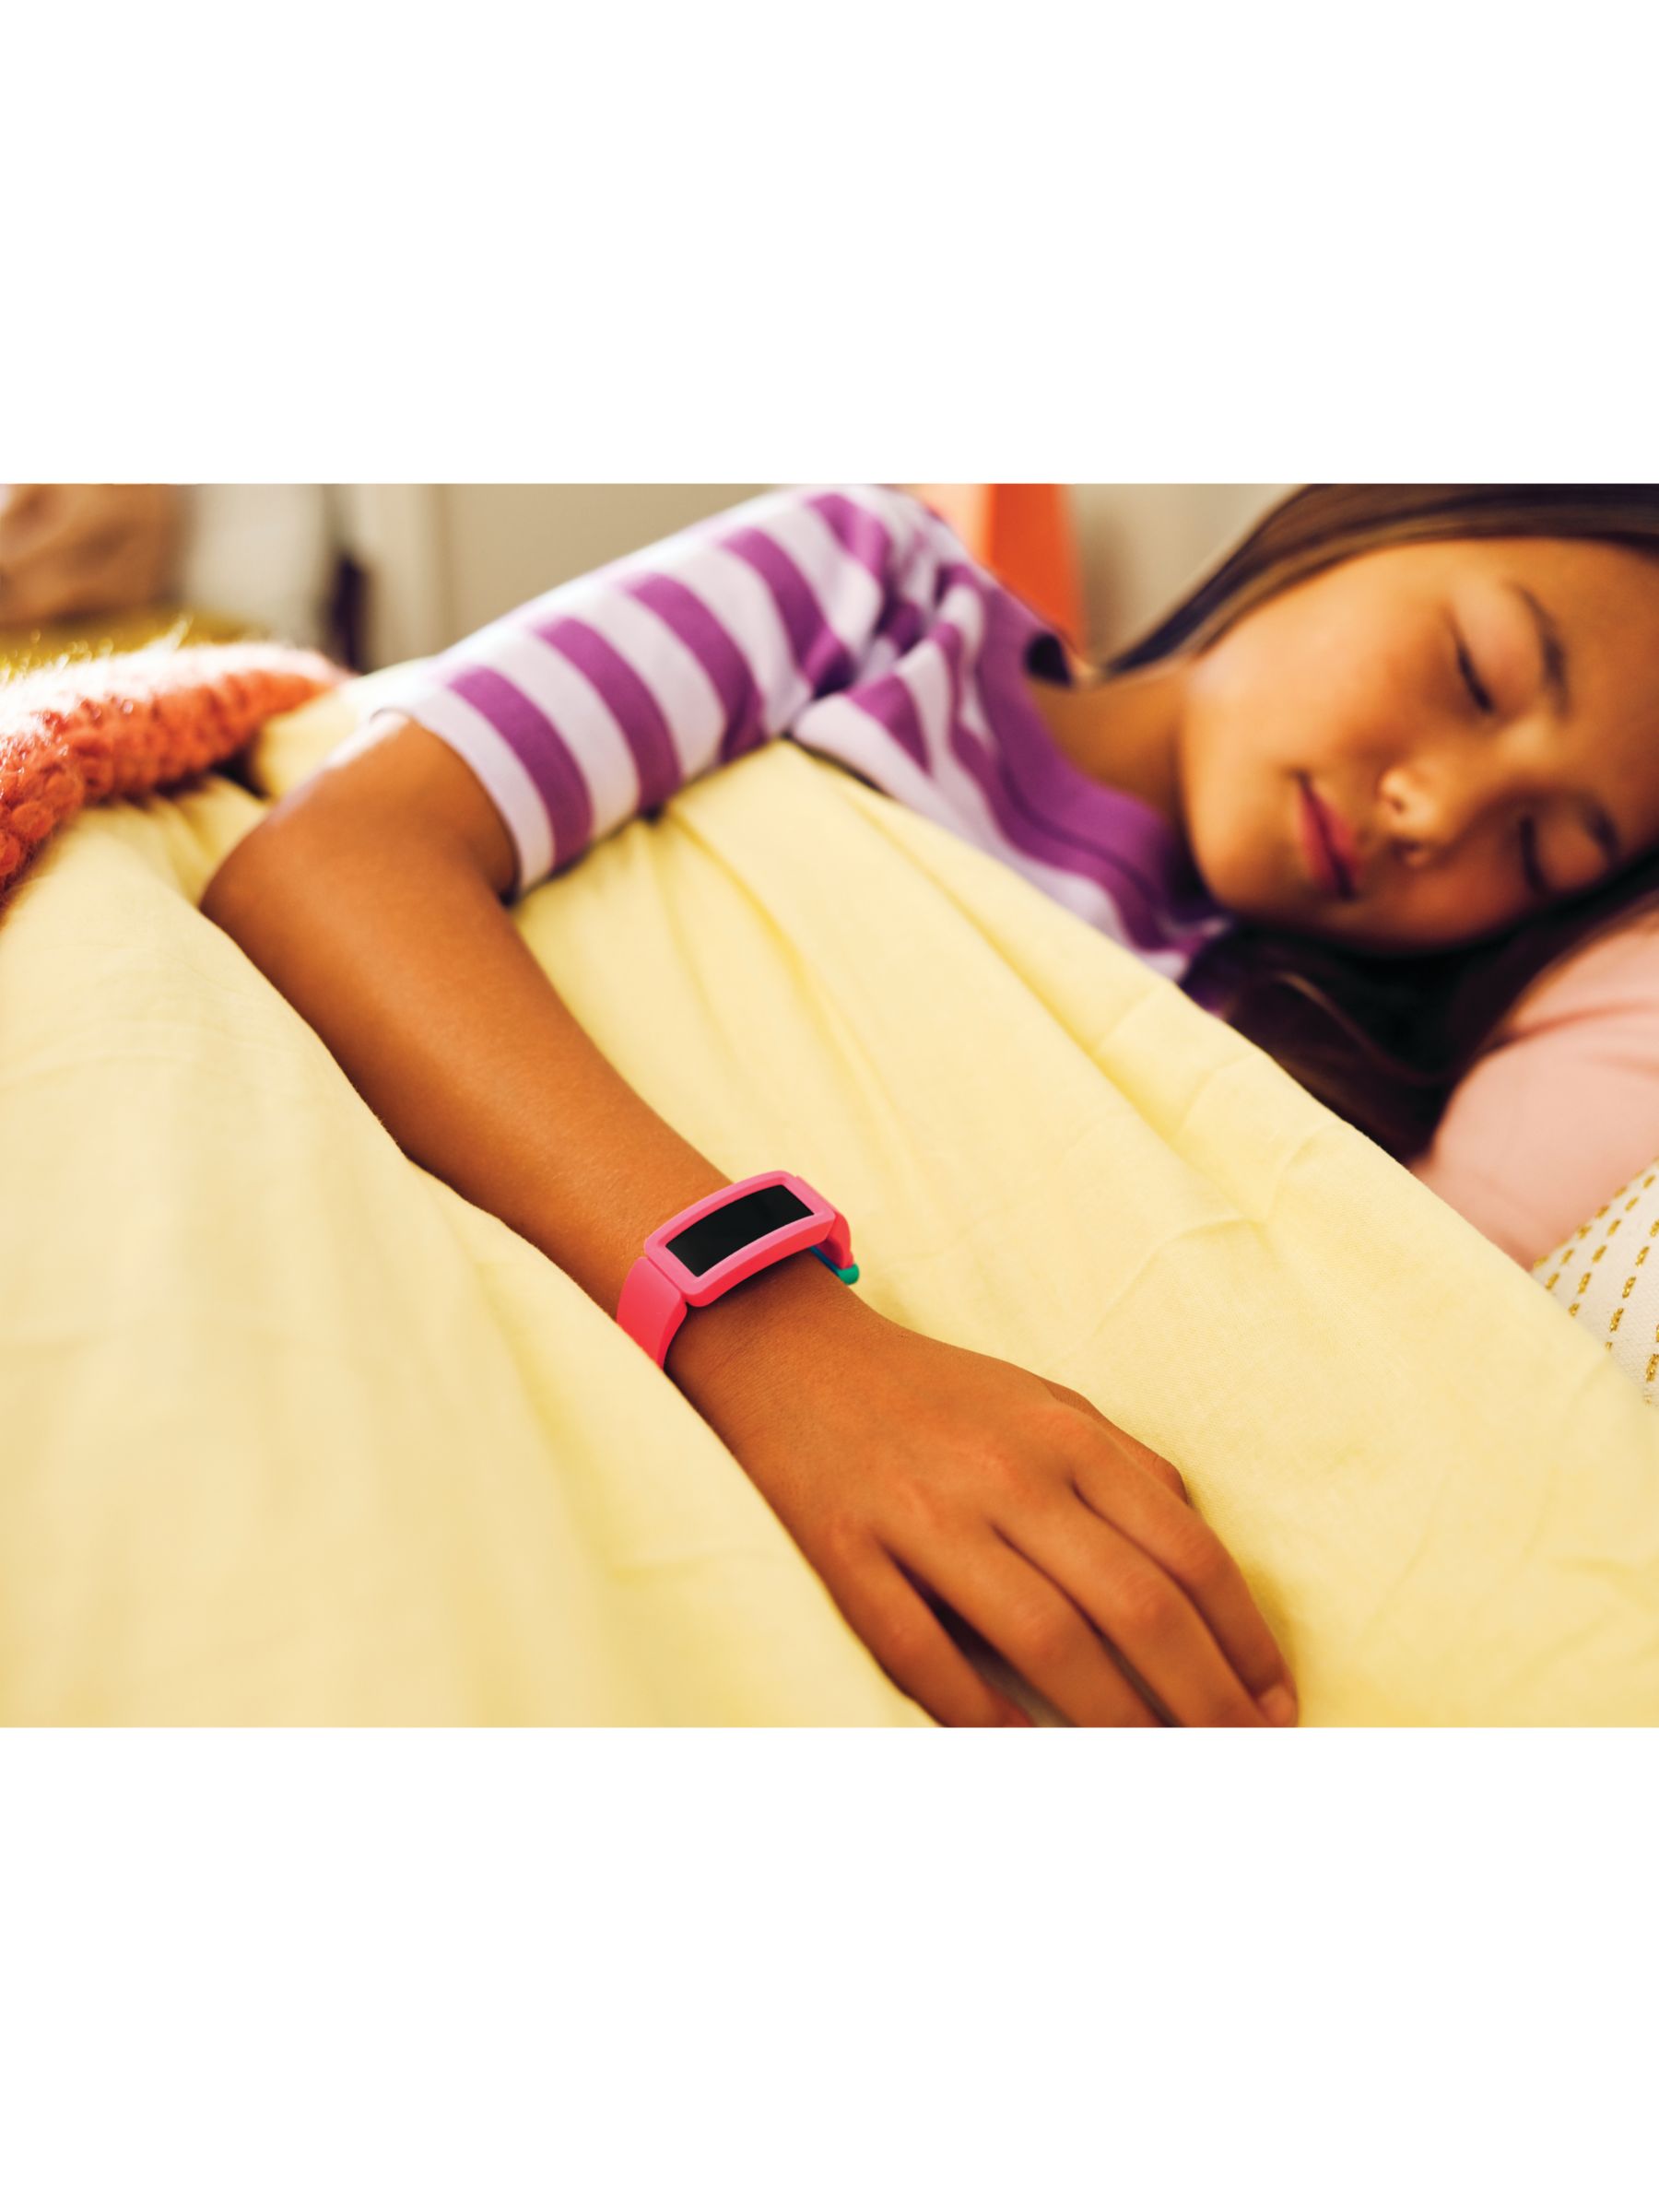 Fitbit Ace 2 Wristband, Children's 